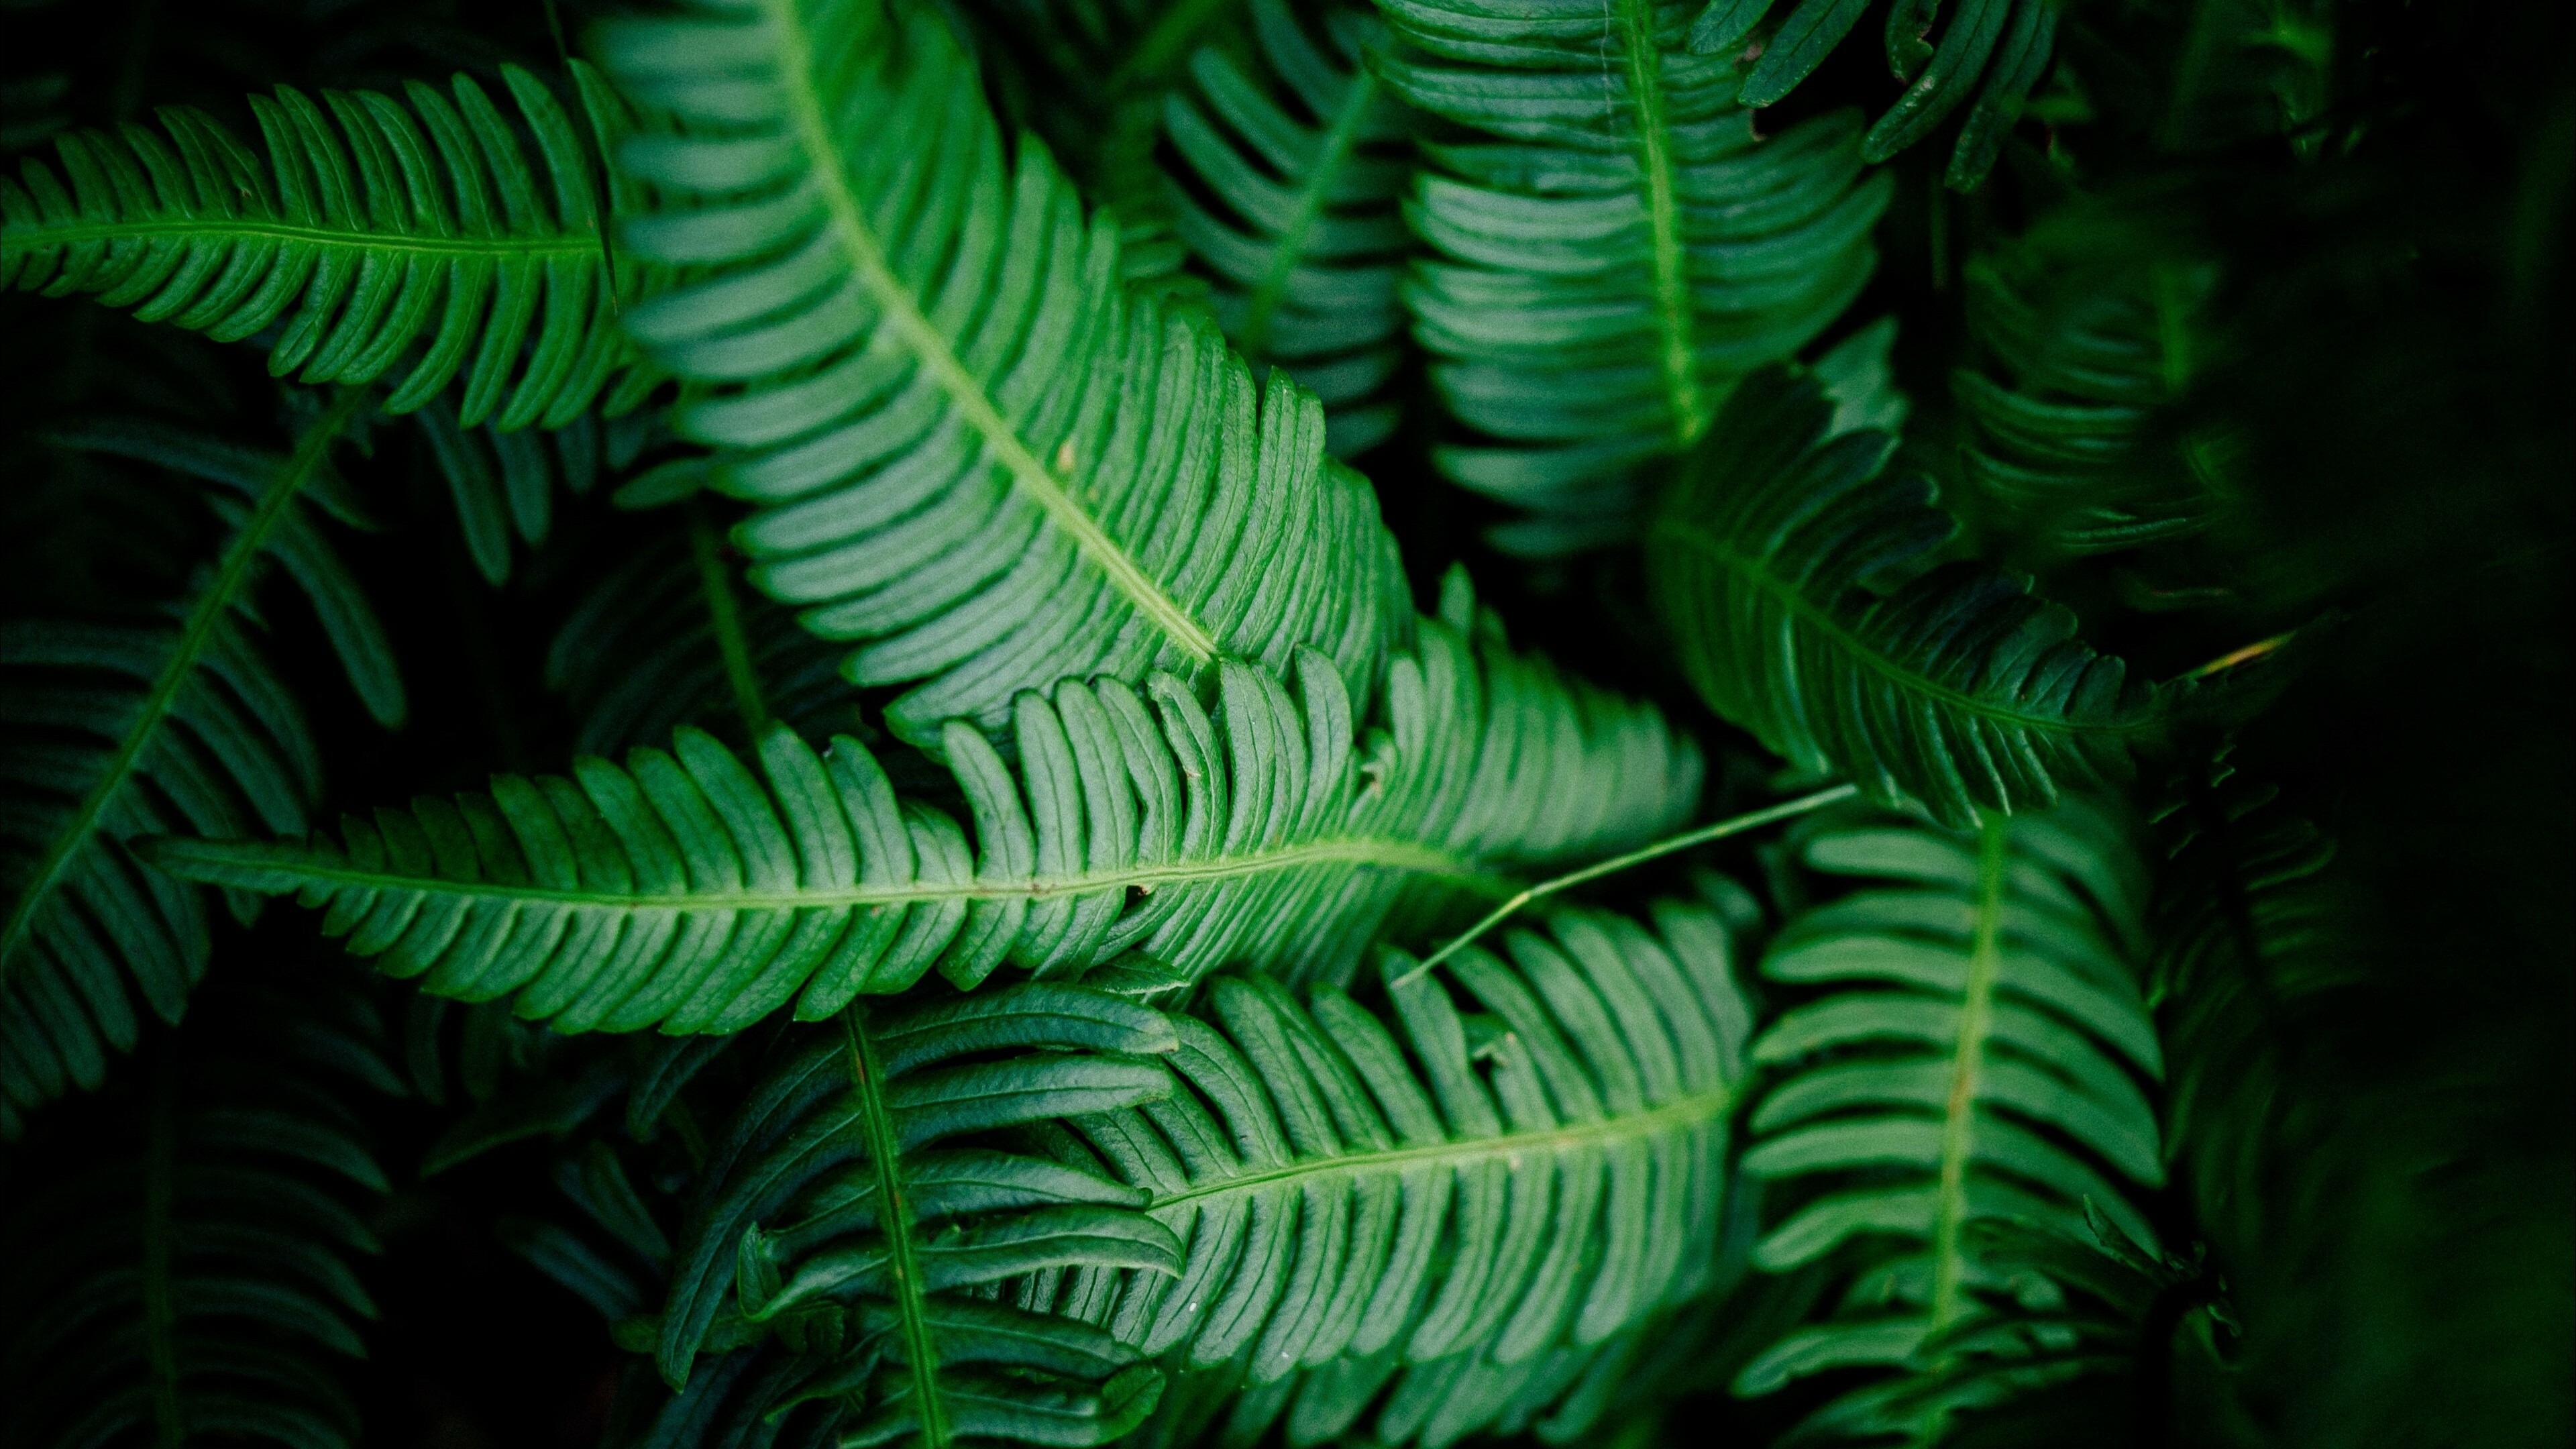 Leaves: Fern plant leaf, Obtaining most of the energy from sunlight via photosynthesis. 3840x2160 4K Wallpaper.